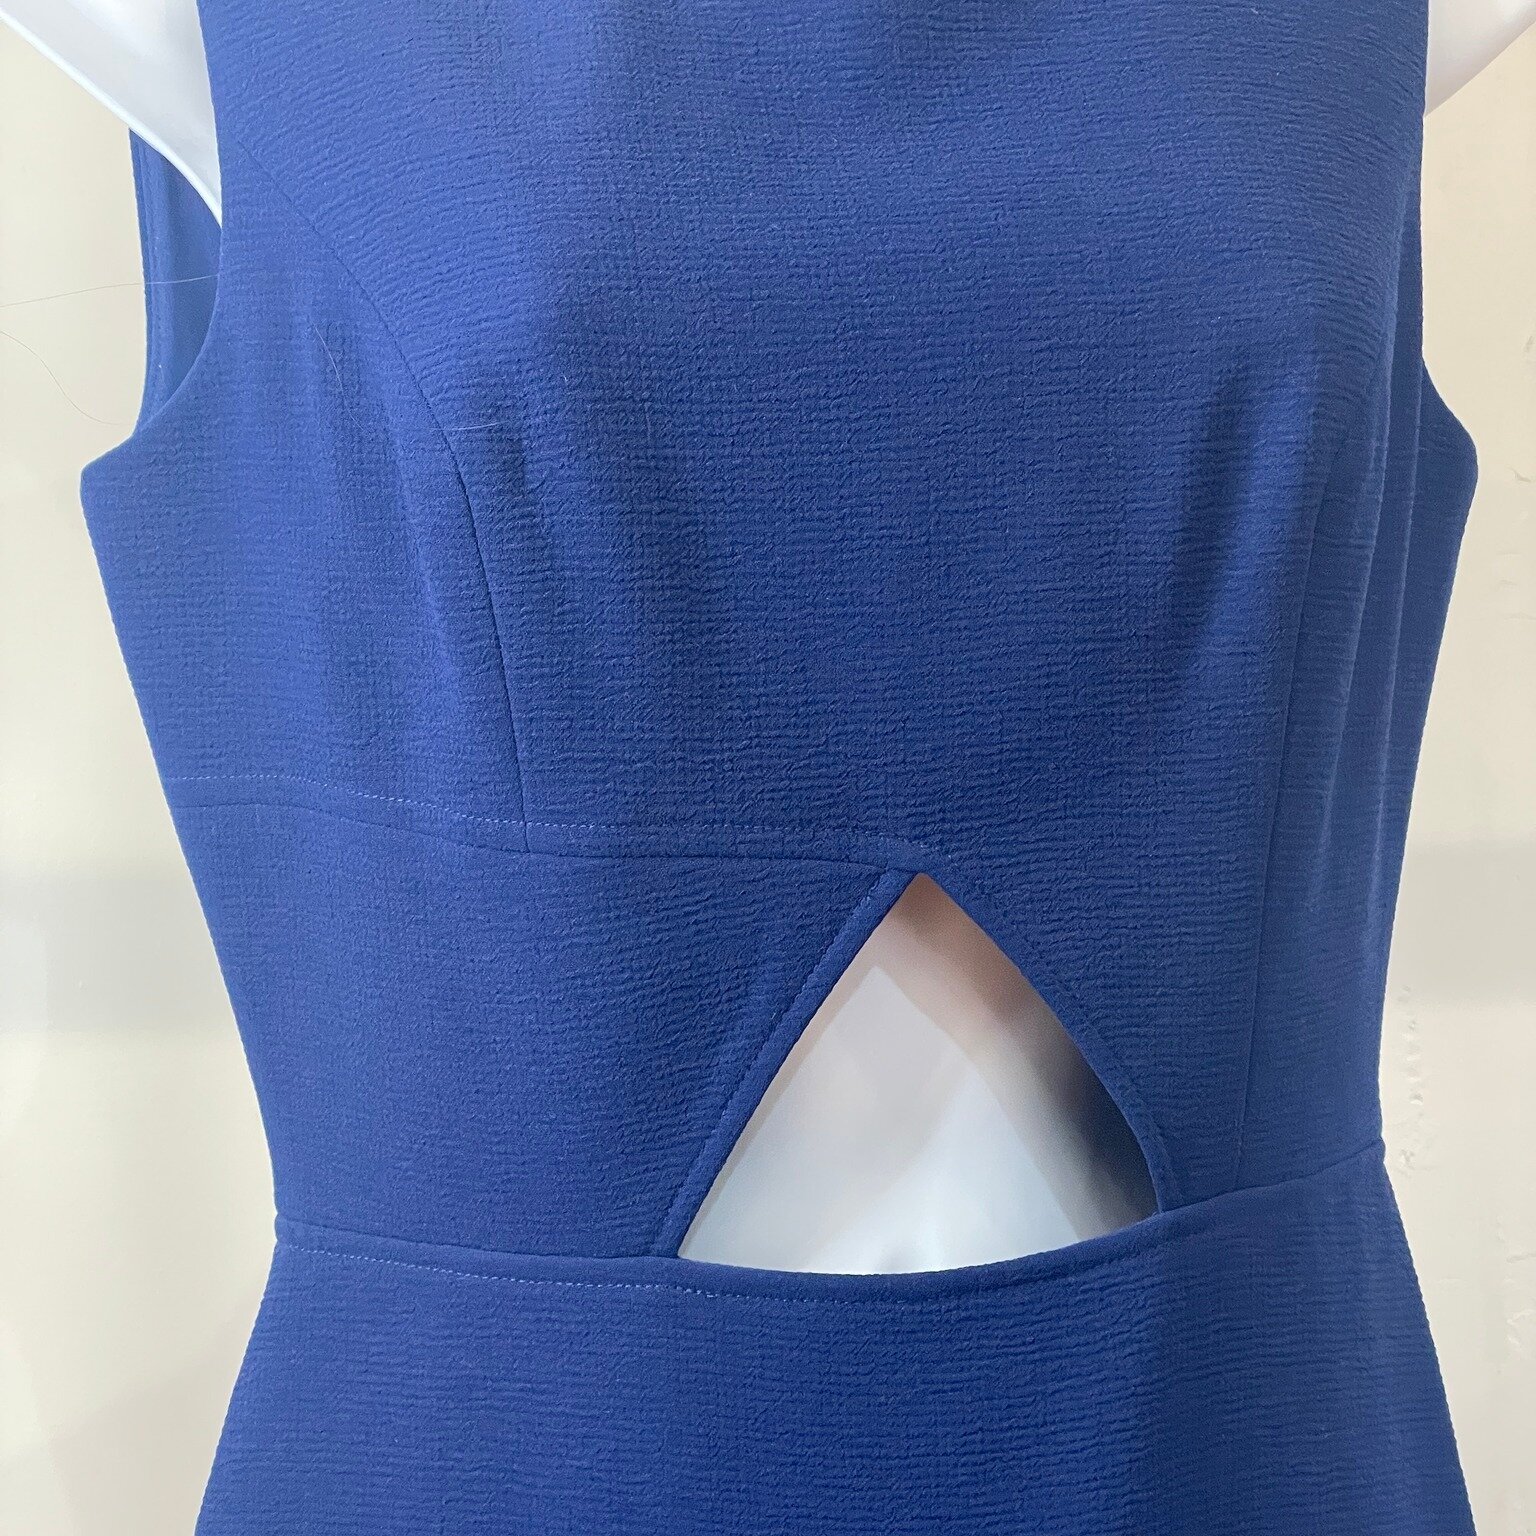 The secret of great style is to feel good in what you wear. ✨
The @bcbgmaxazria Annabel sleeveless dress is an essential addition to your wardrobe.

Shop on our website through our link in bio.

#preloved #vintage #yvrvintage #sustainablefashion #dre